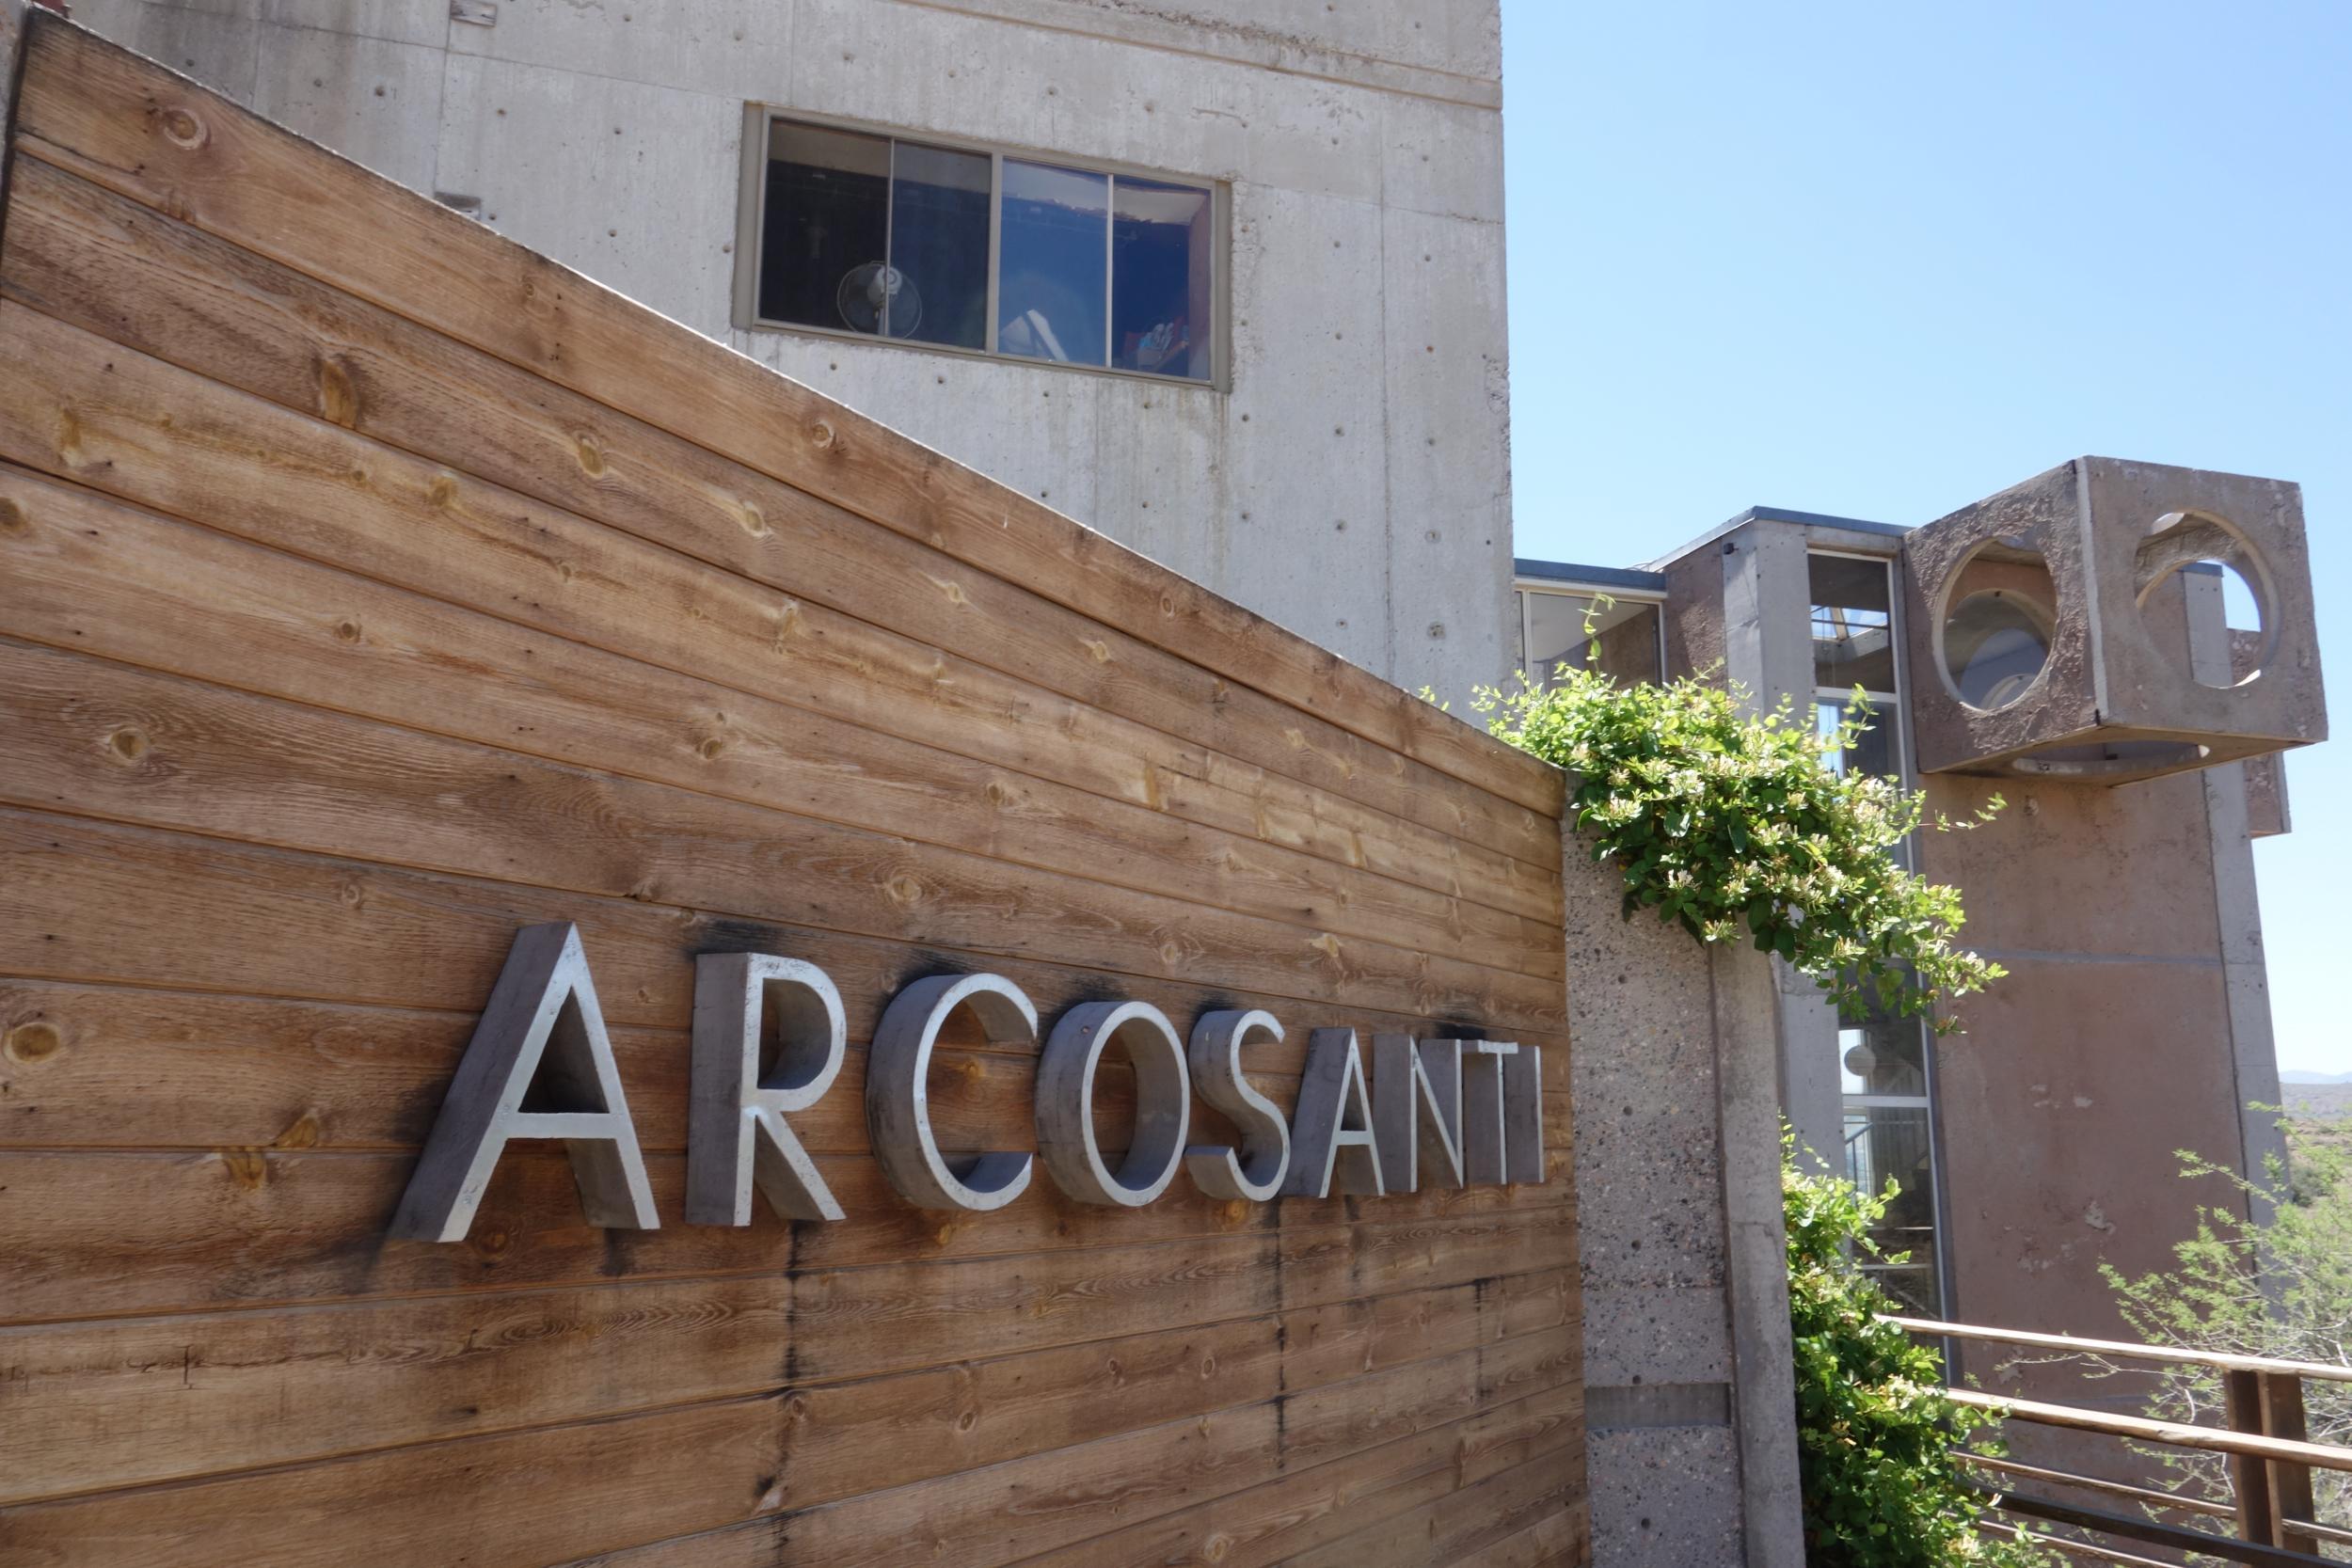 Most of Arcosanti's residents are millennials and dreamers